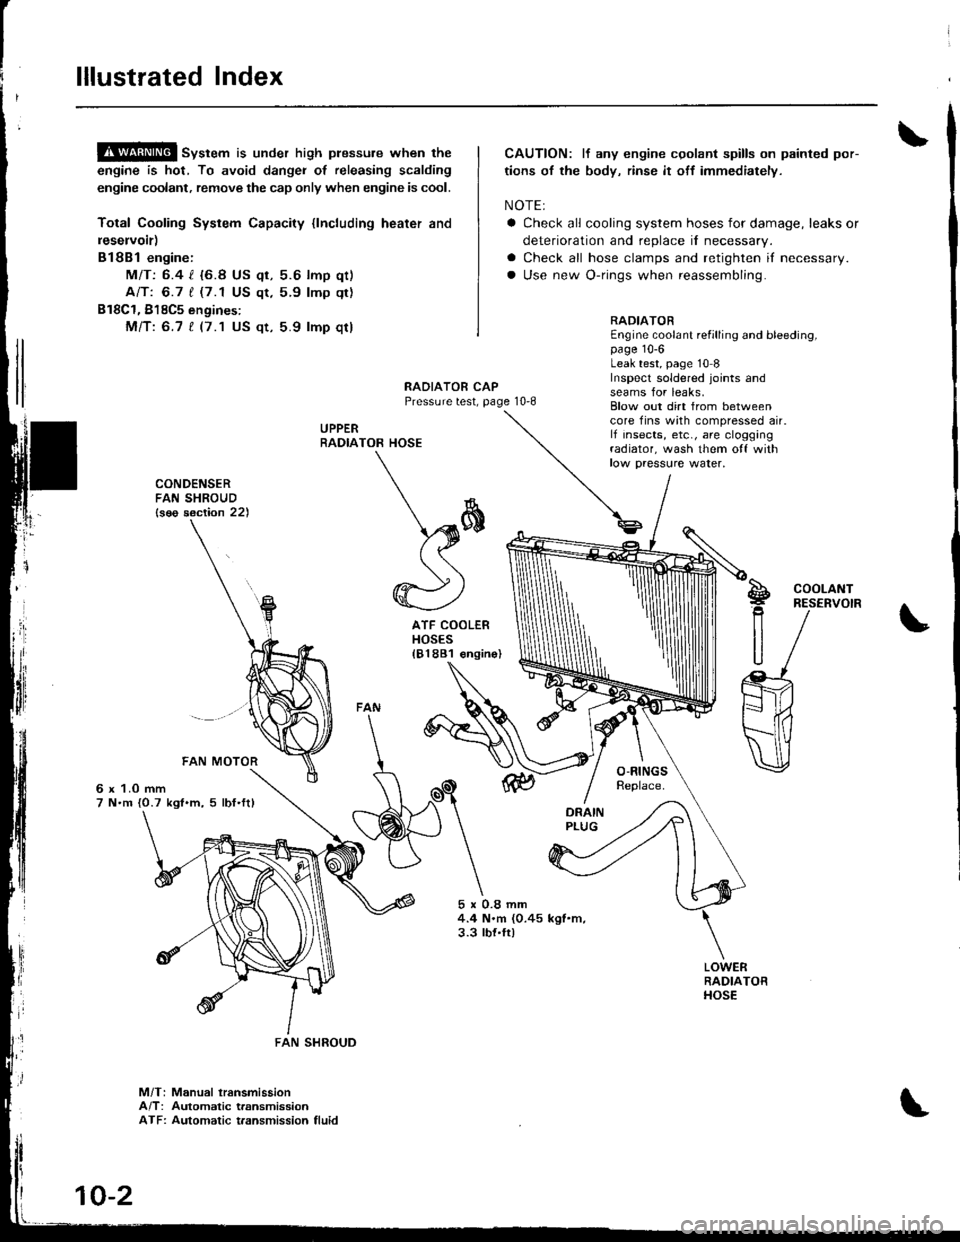 HONDA INTEGRA 1998 4.G Workshop Manual lllustrated Index
!$!!@ sv"t"m is under high plessure when the
engine is hot, To avoid dangei of releasing scalding
engine coolant, remove the cap only when engine is cool.
Total Cooling System Capaci